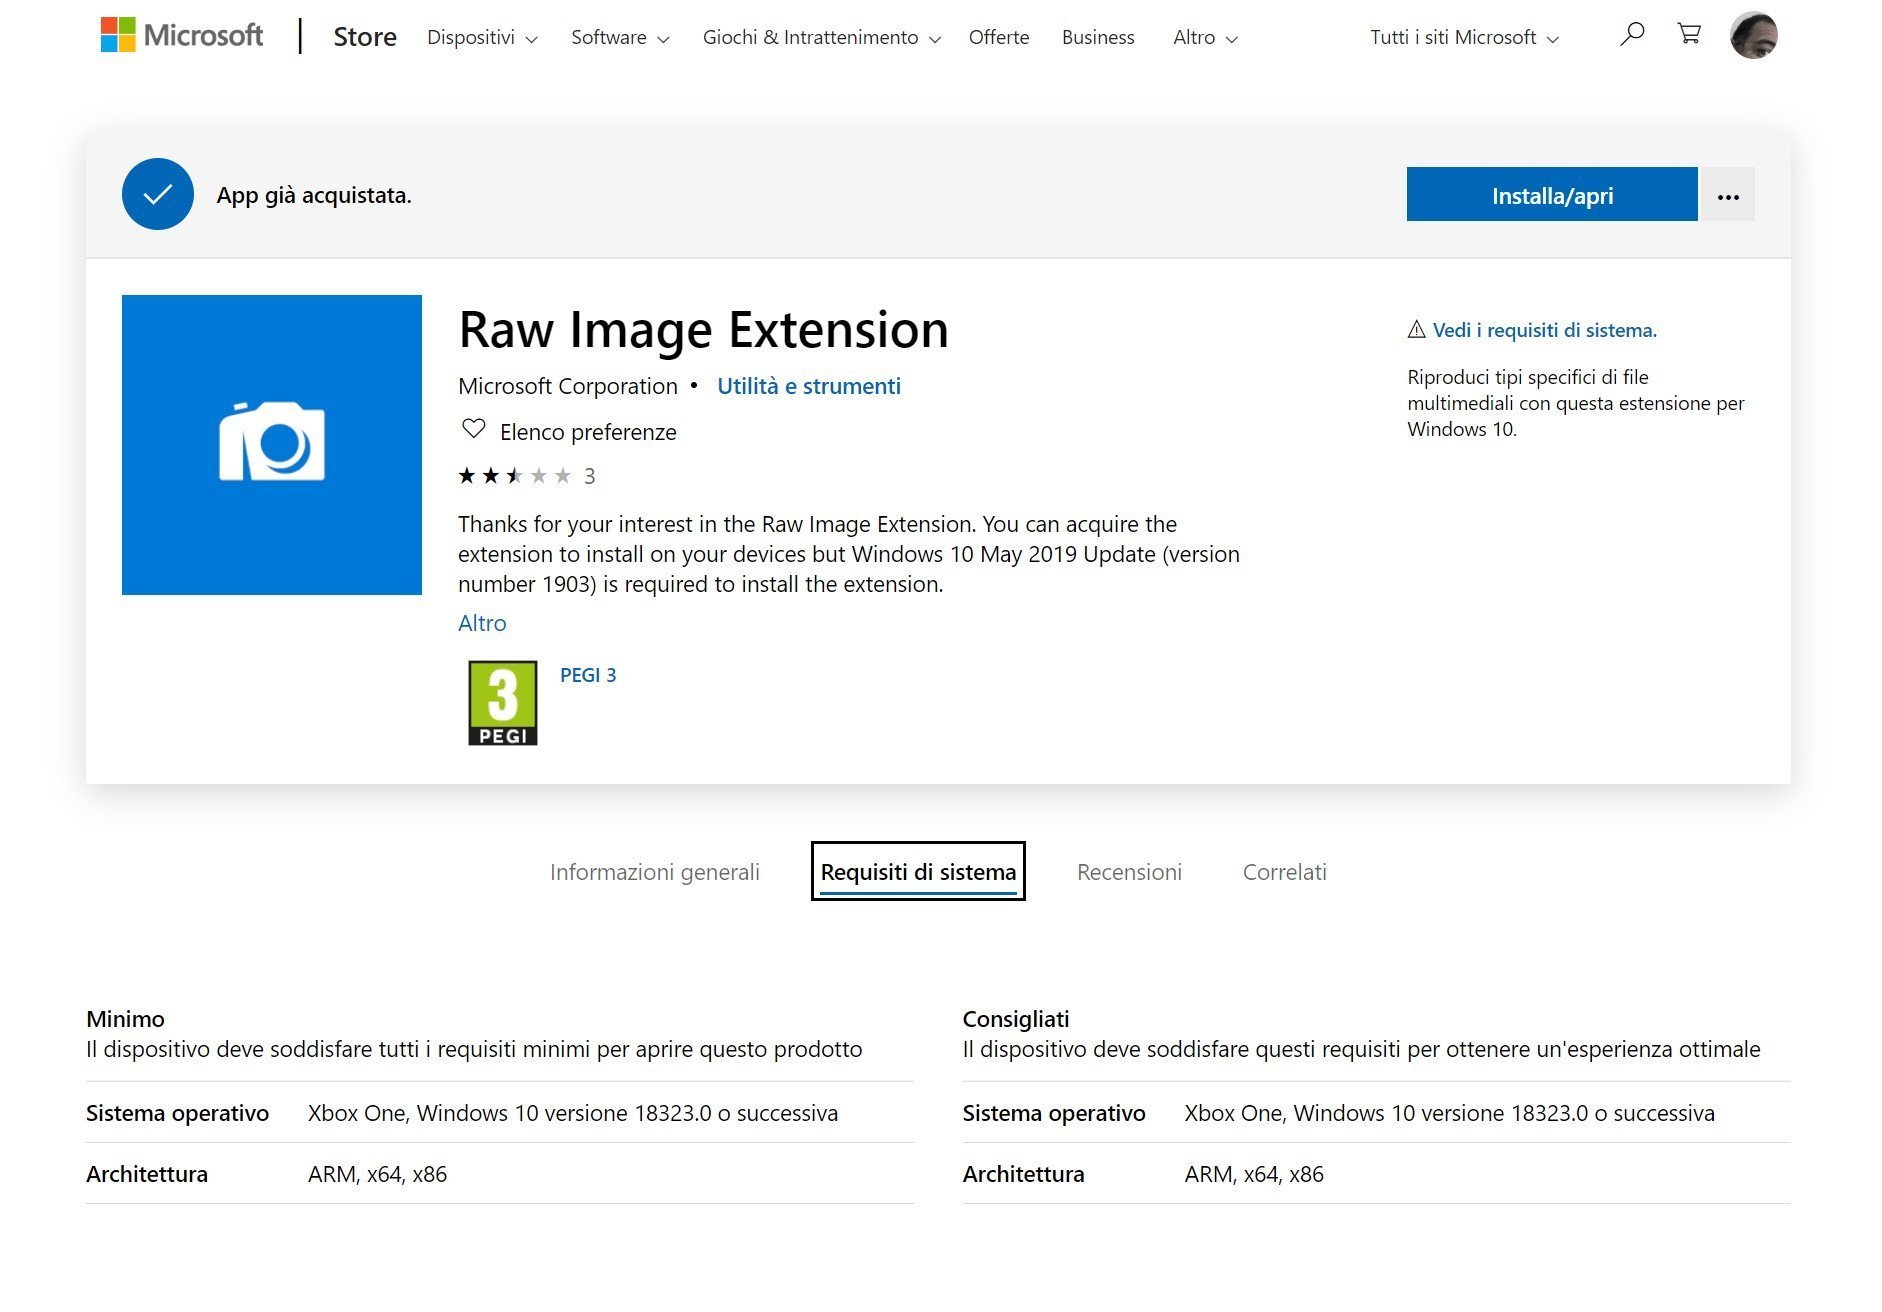 Microsoft Store - Raw Image Extension